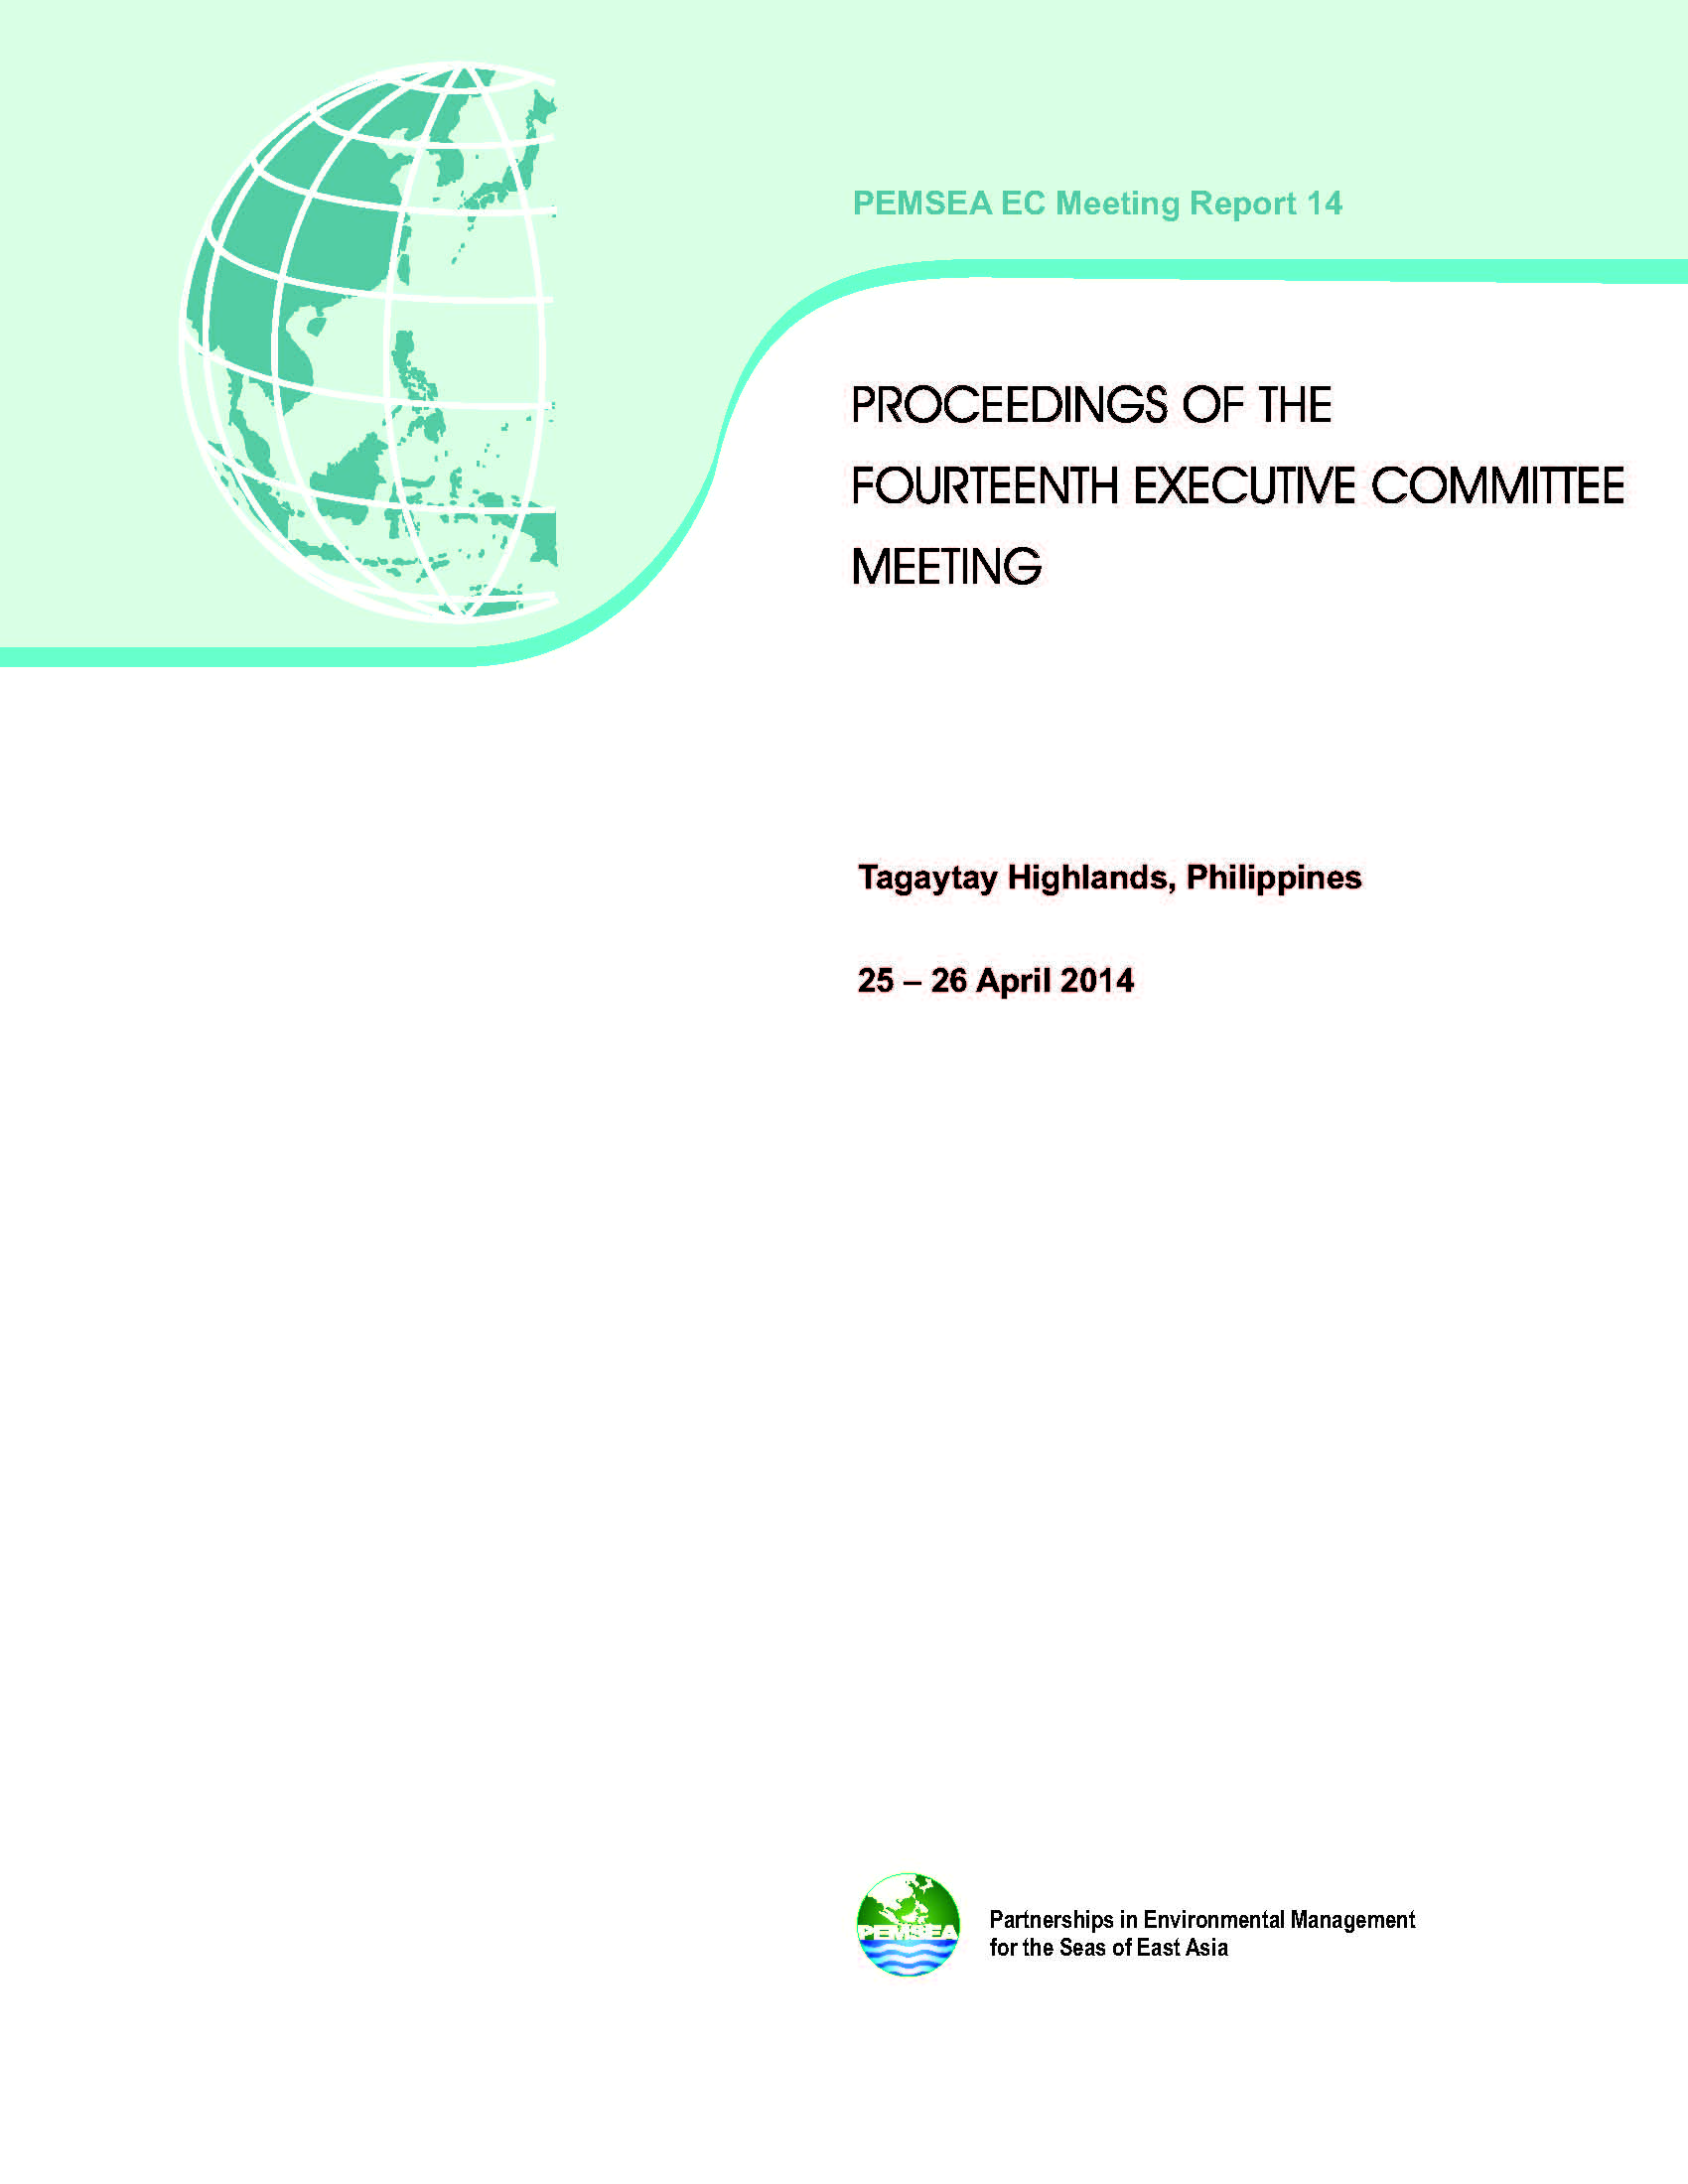 Proceedings of the Fourteenth Executive Committee Meeting